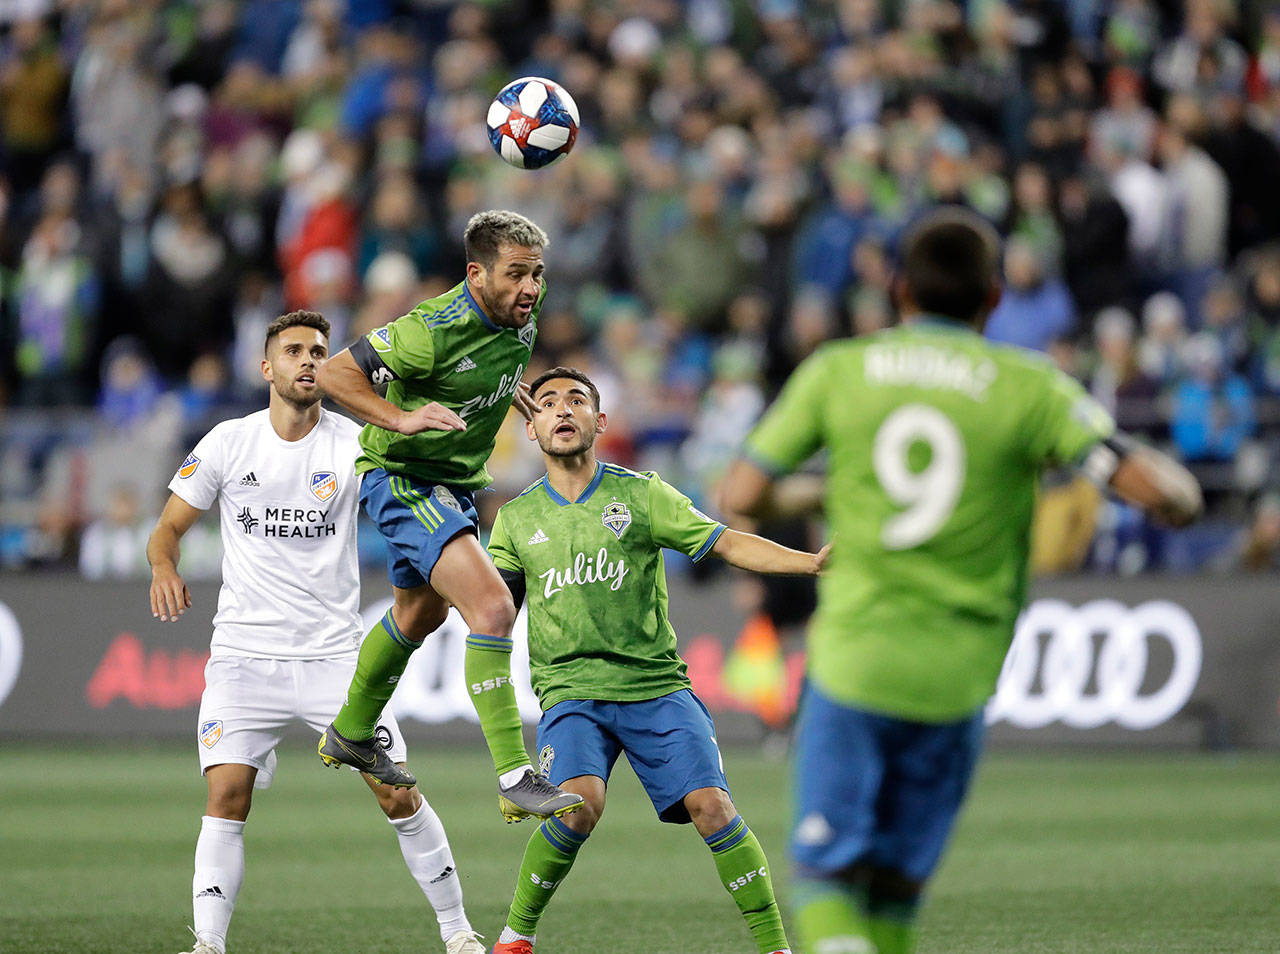 Sounders midfielder Nicolas Lodeiro (second from left) heads the ball during a match against FC Cincinnati on March 2, 2019, in Seattle. (AP Photo/Ted S. Warren)